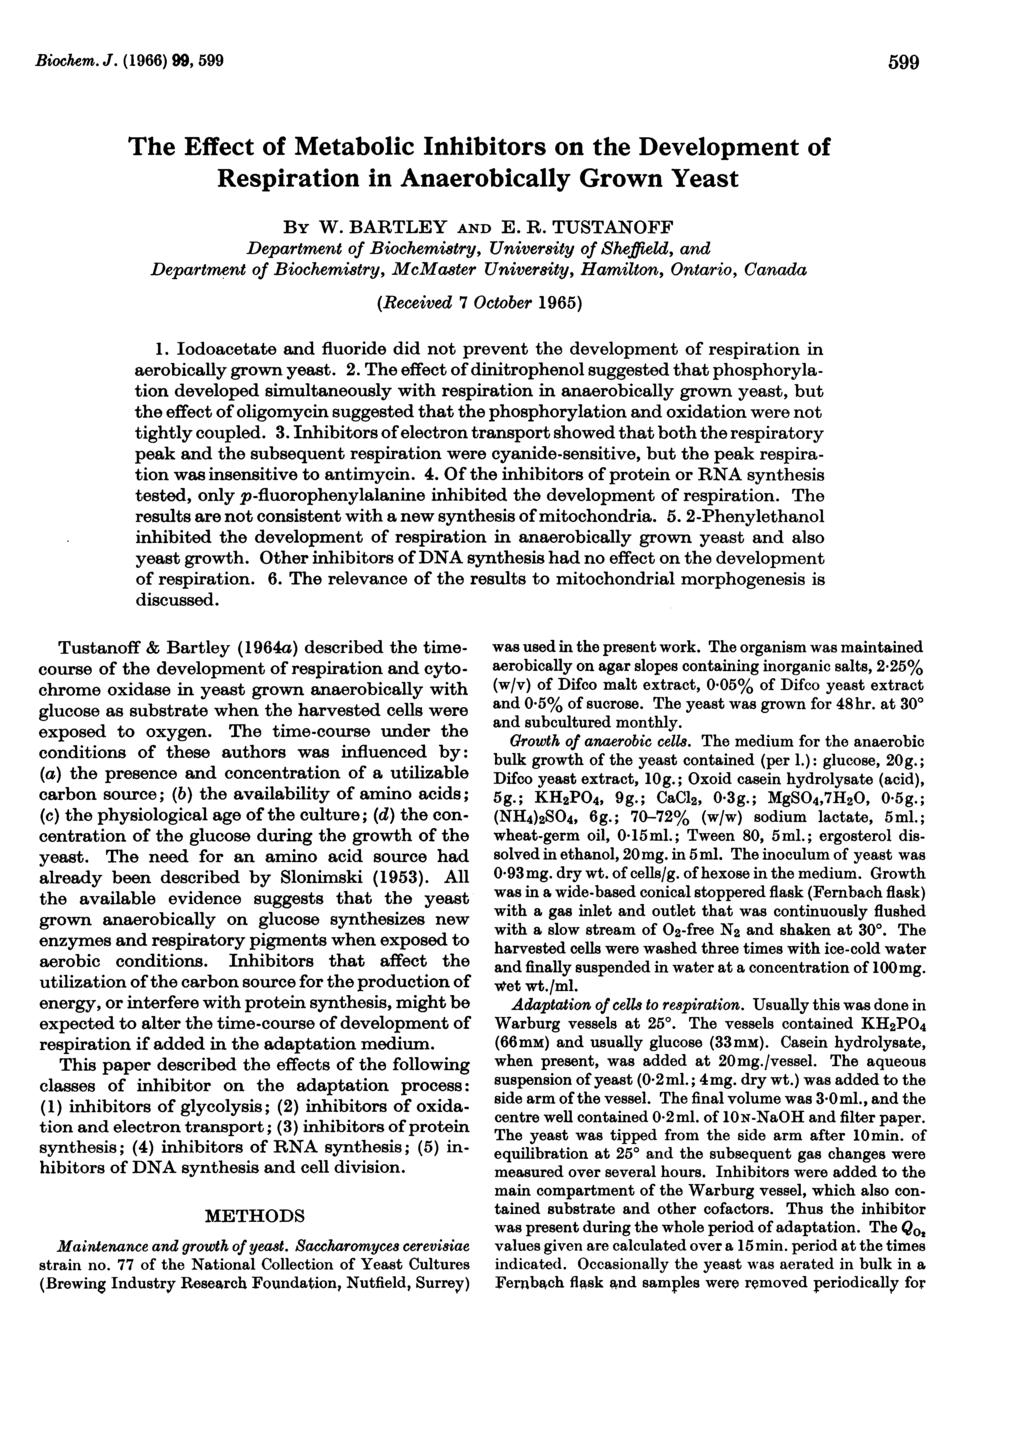 Biochem. J. (1966) 99, 599 599 The Effect of Metabolic s on the Development of in Anaerobically Grown Yeast BY W. BARTLEY AND E. R.